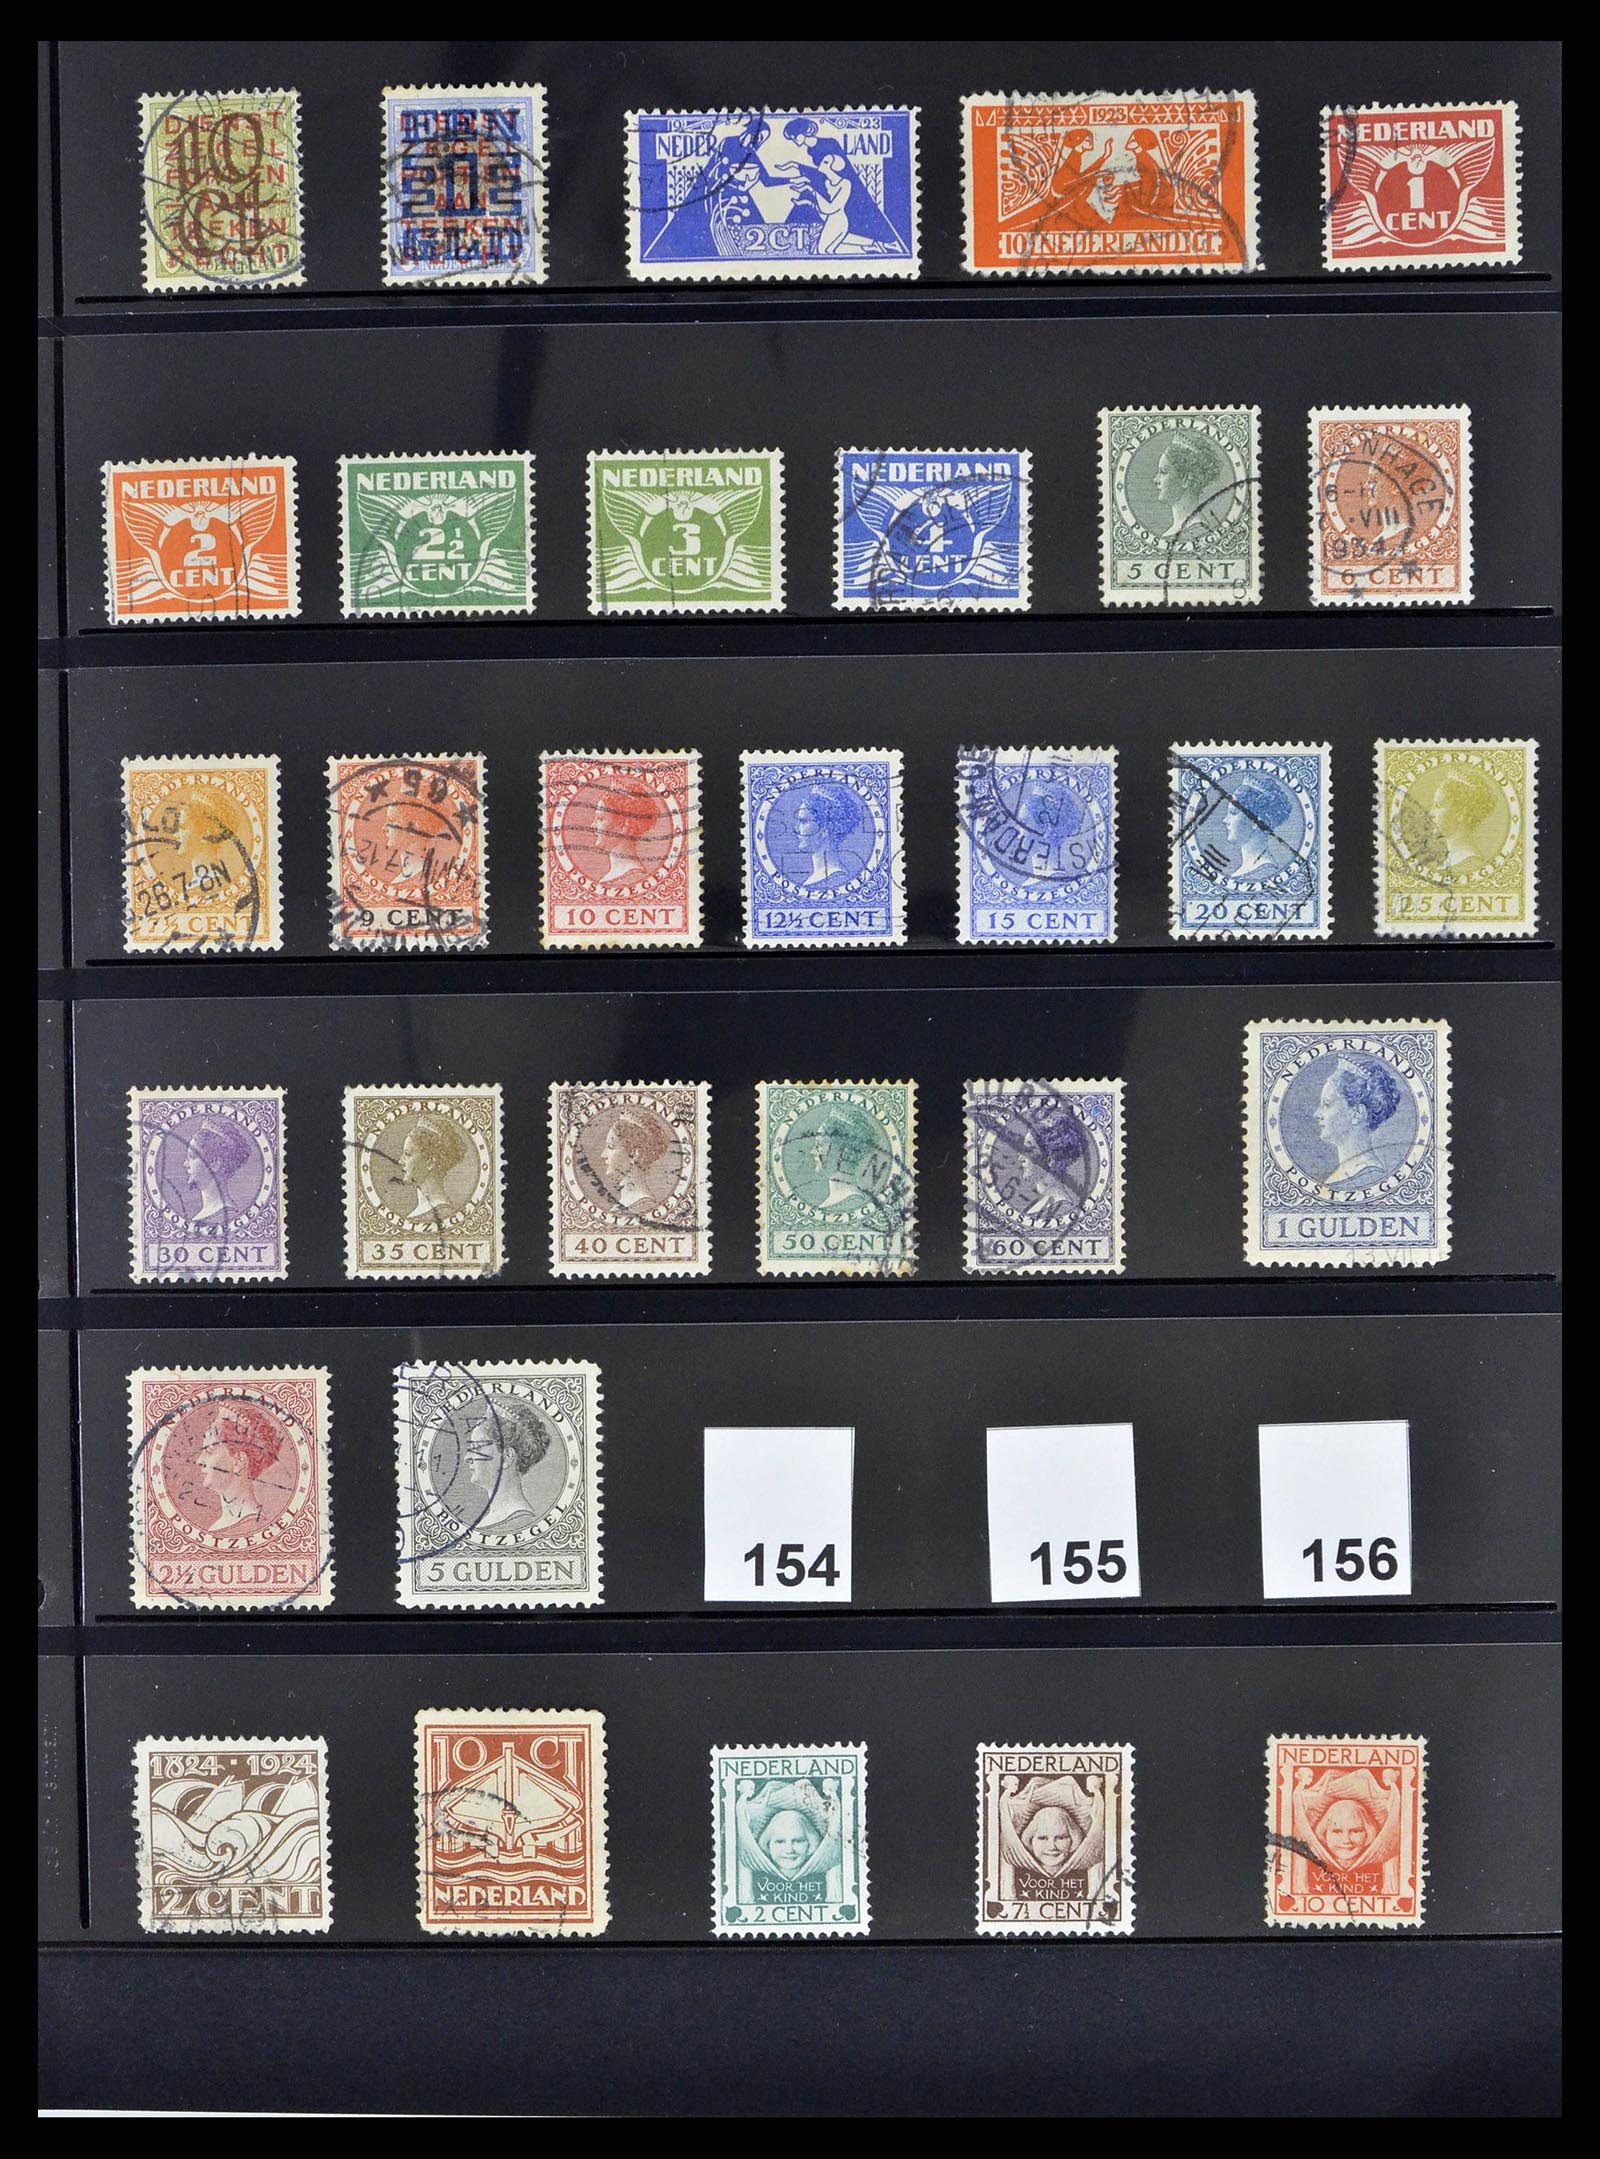 38791 0090 - Stamp collection 38791 Netherlands 1852-2014.